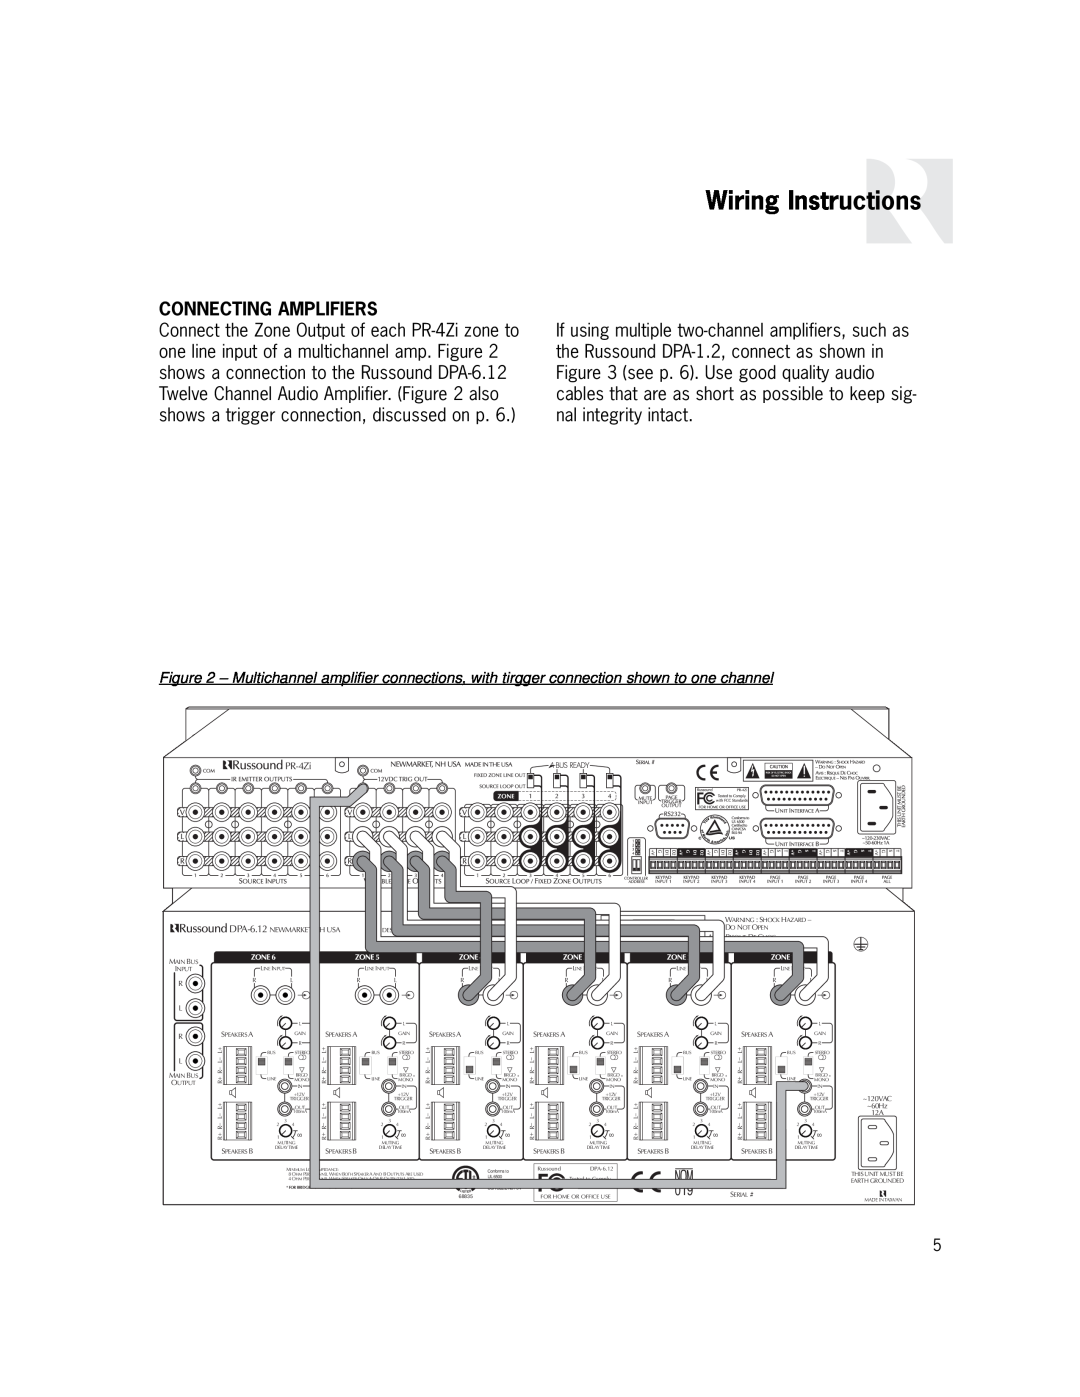 Russound PR-4Zi instruction manual Wiring Instructions, Connecting Amplifiers 